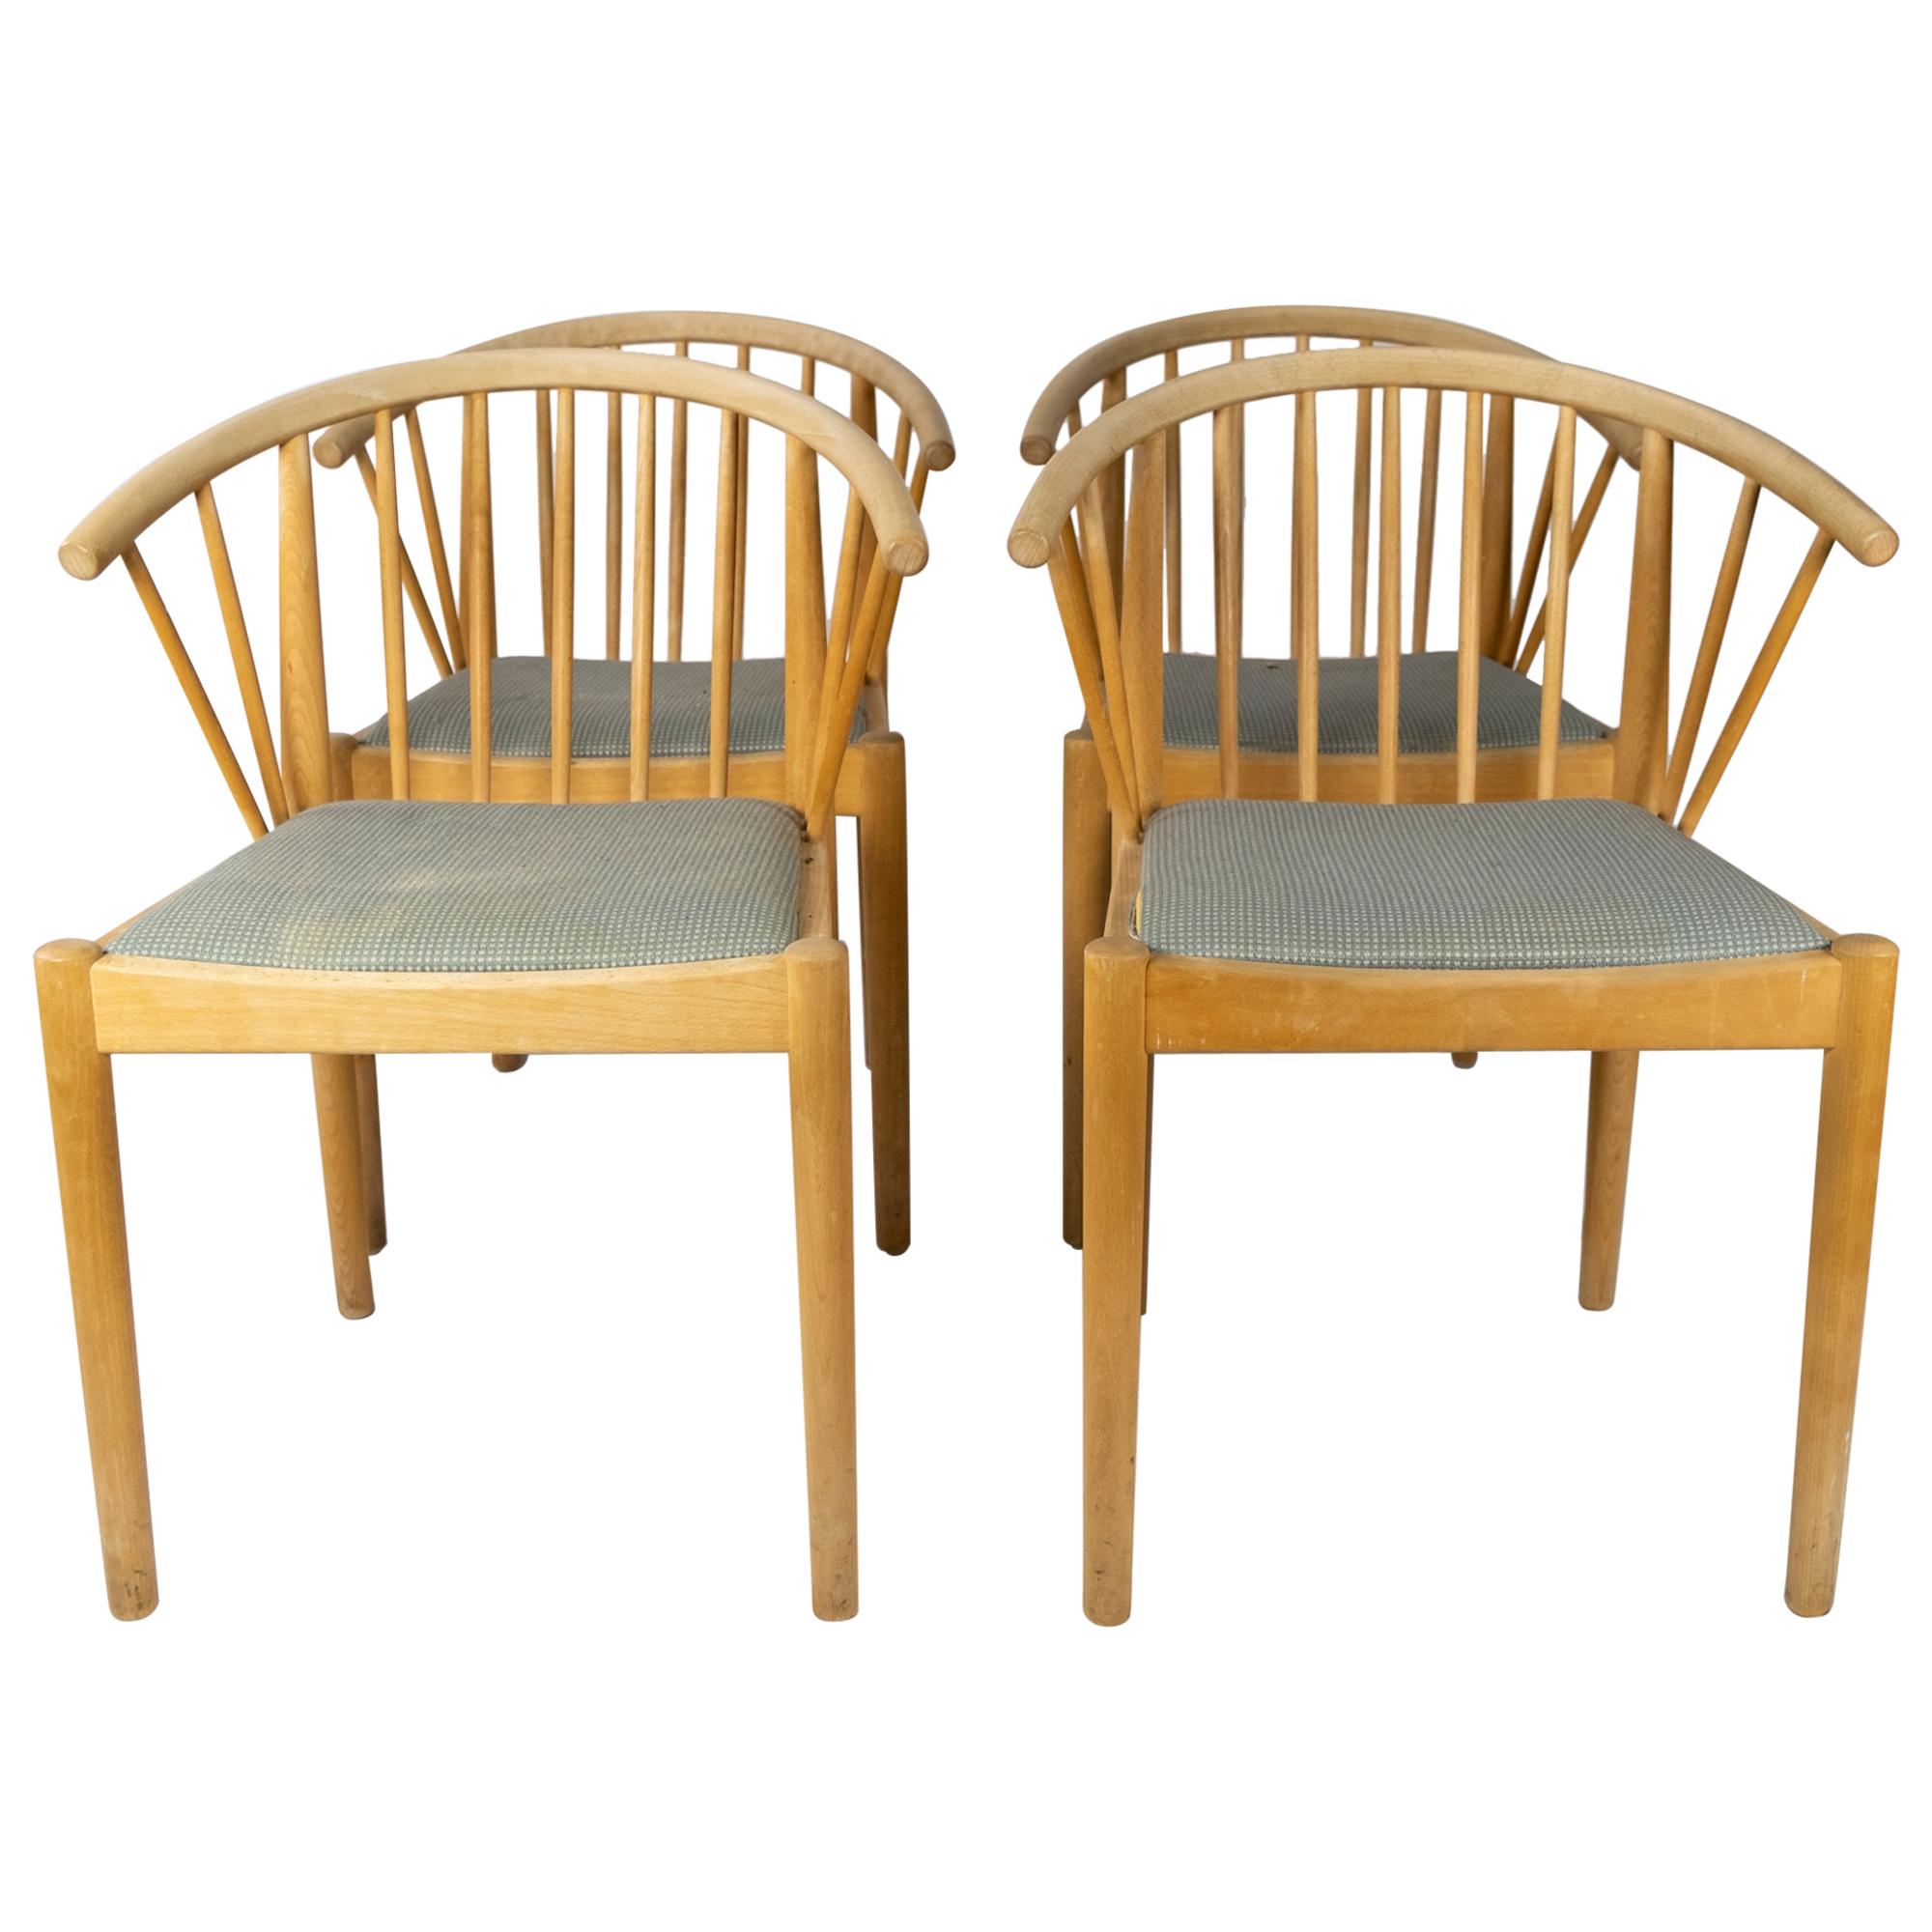 Set of Four Dining Room Chairs in Beech of Danish Design from the 1960s